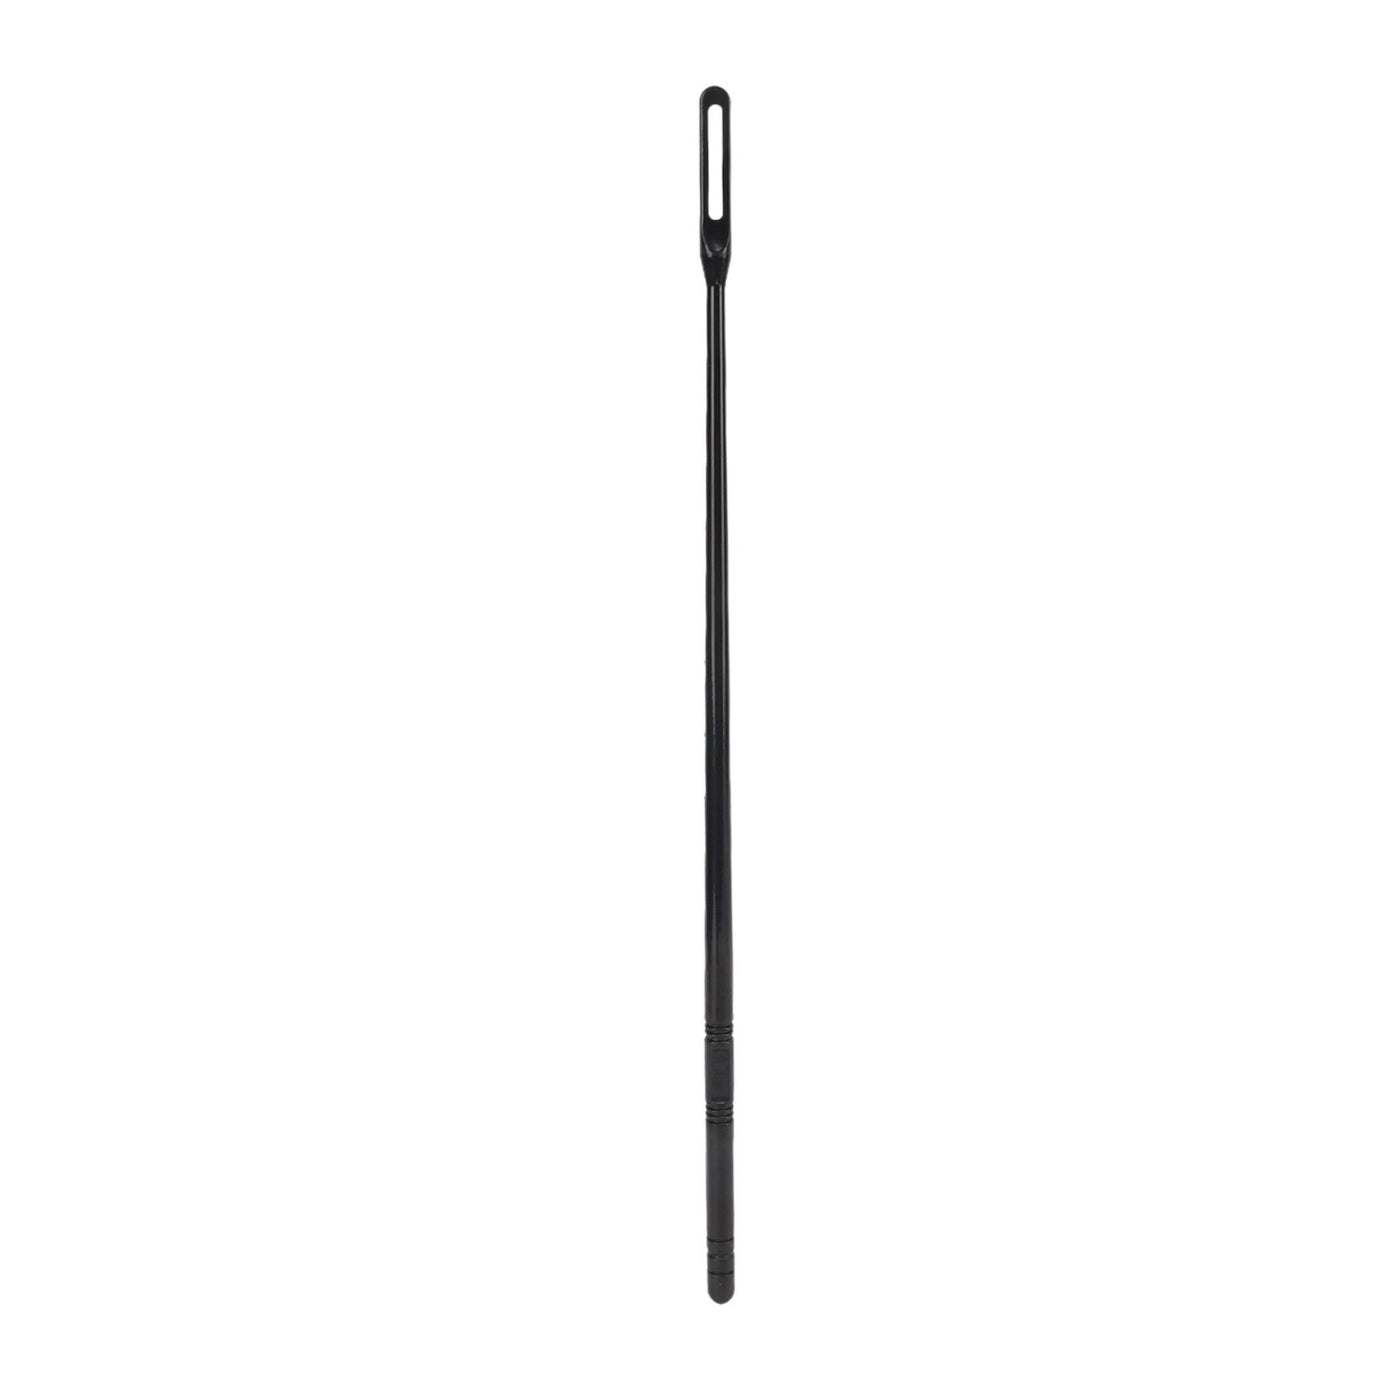 Grover Trophy Recorder Cleaning Rod (8495)